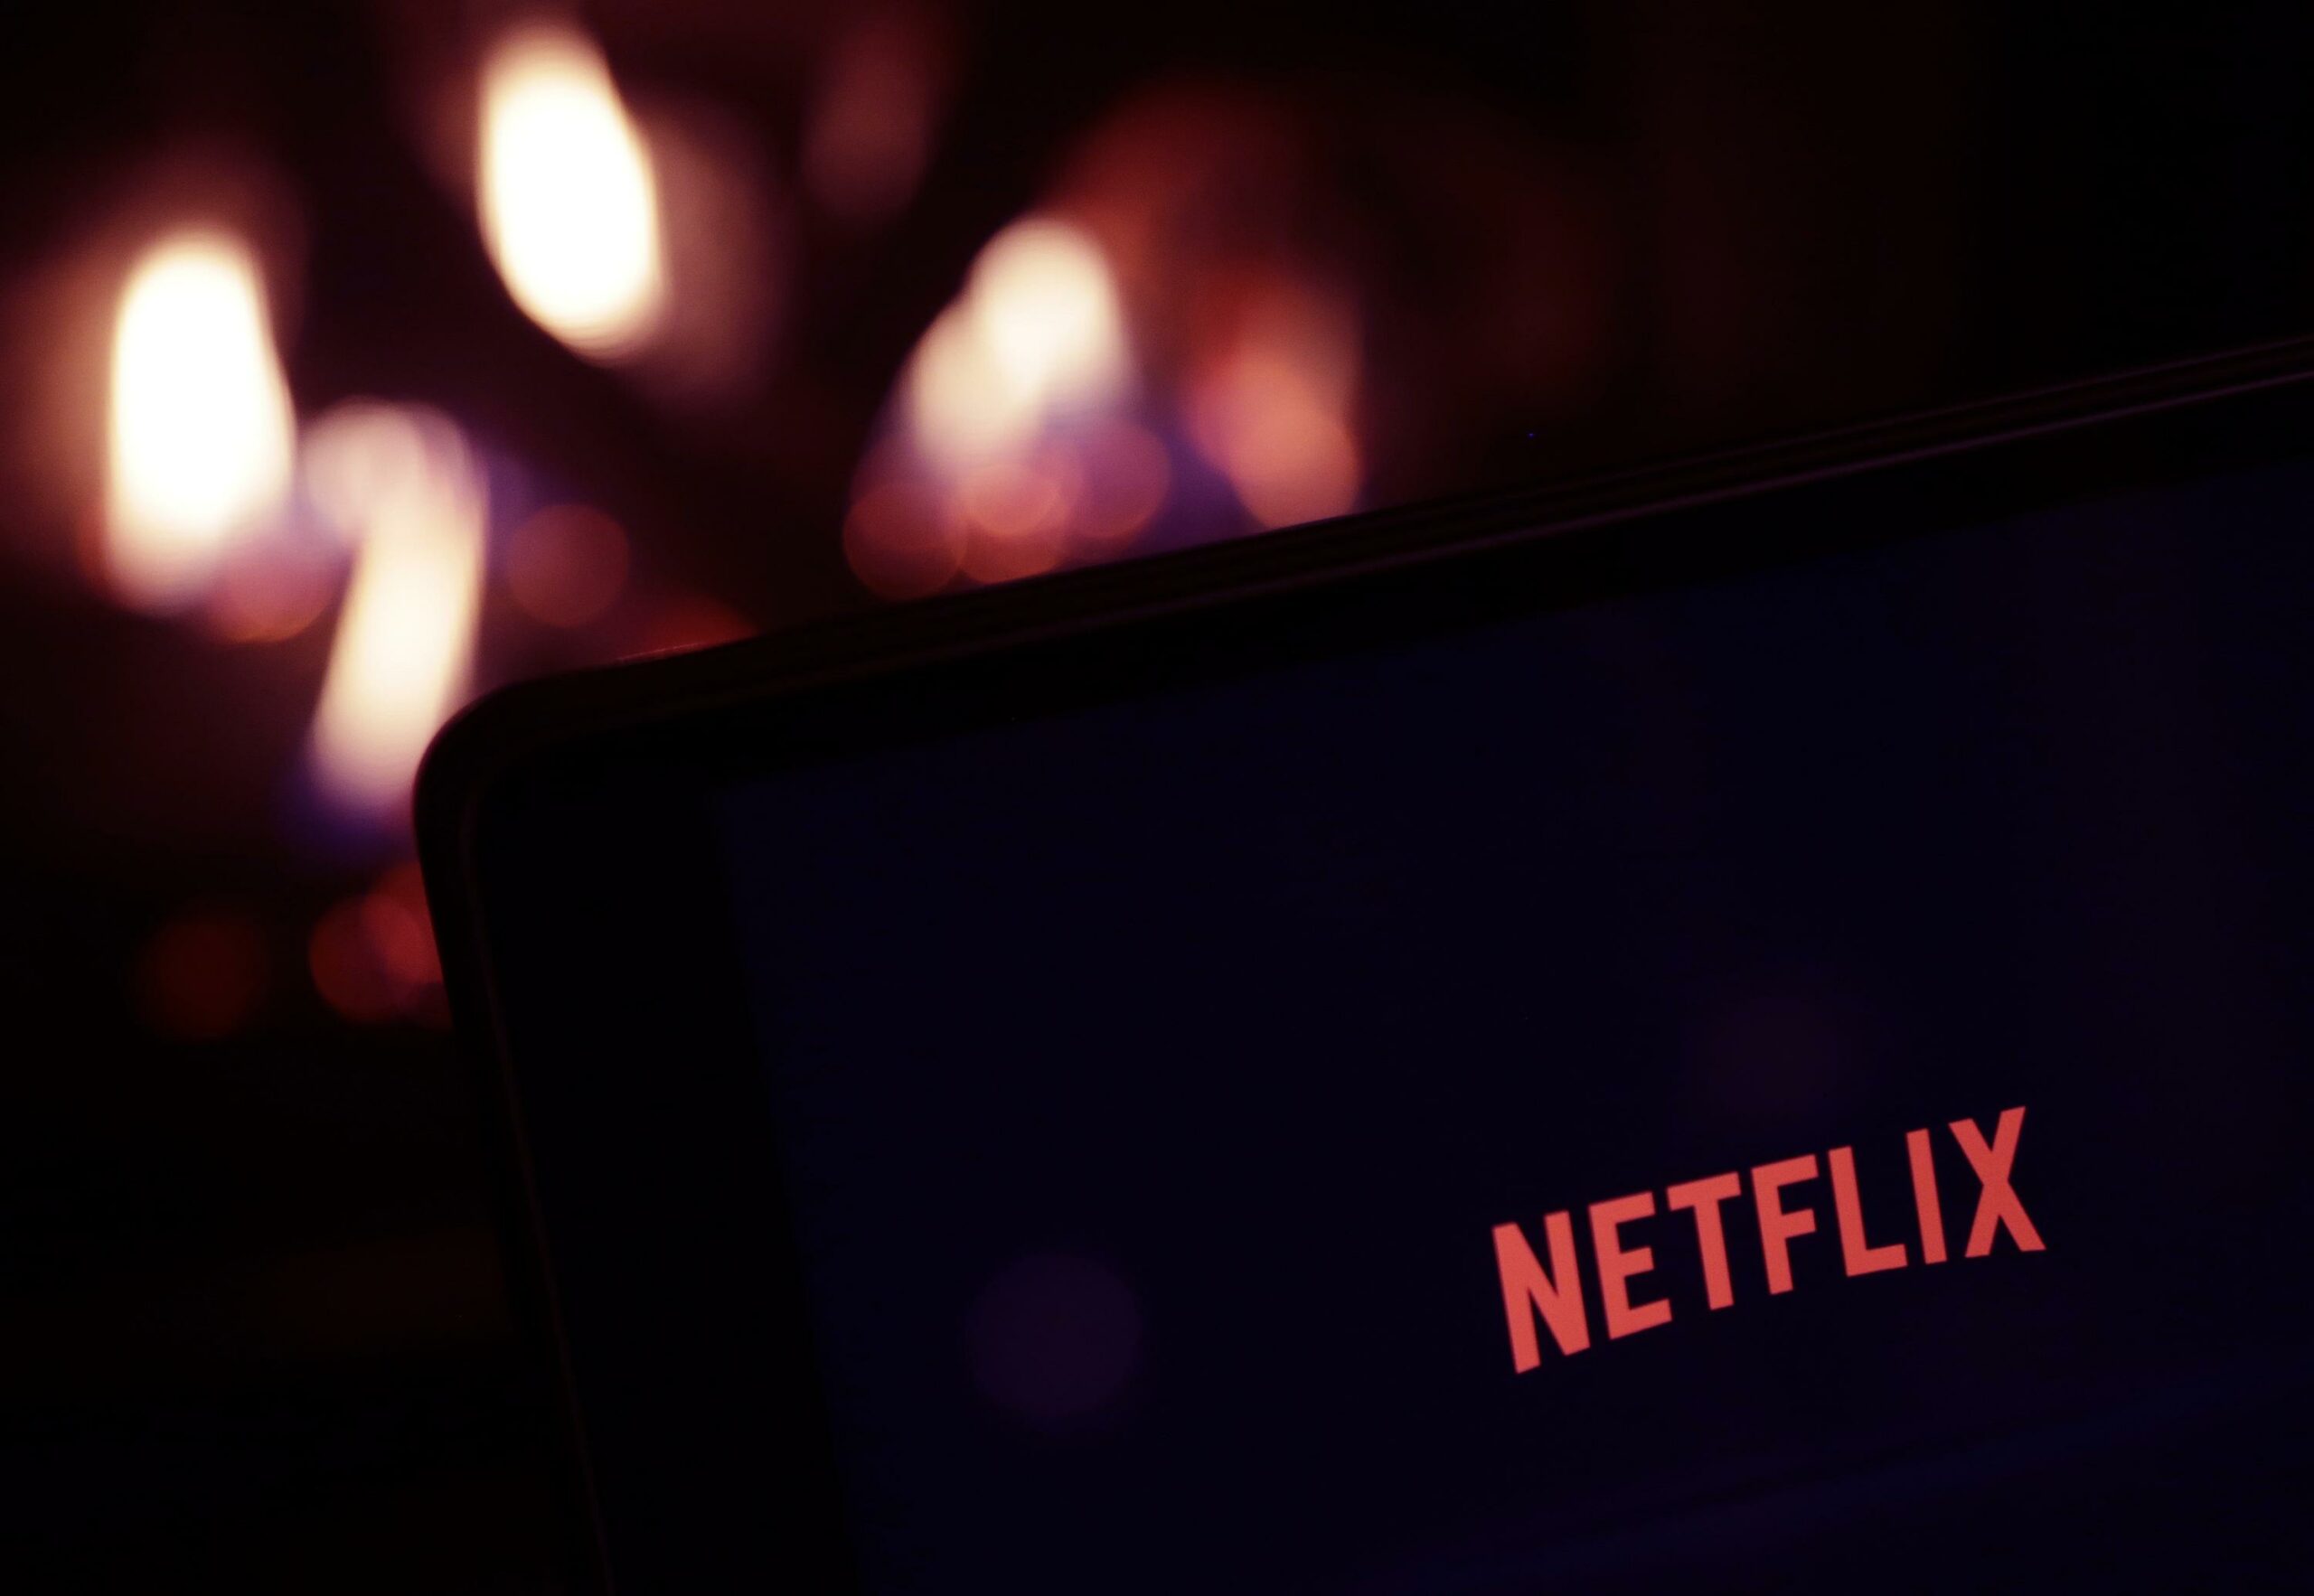 Gulf Arab nations ask NETFLIX to remove gay content…